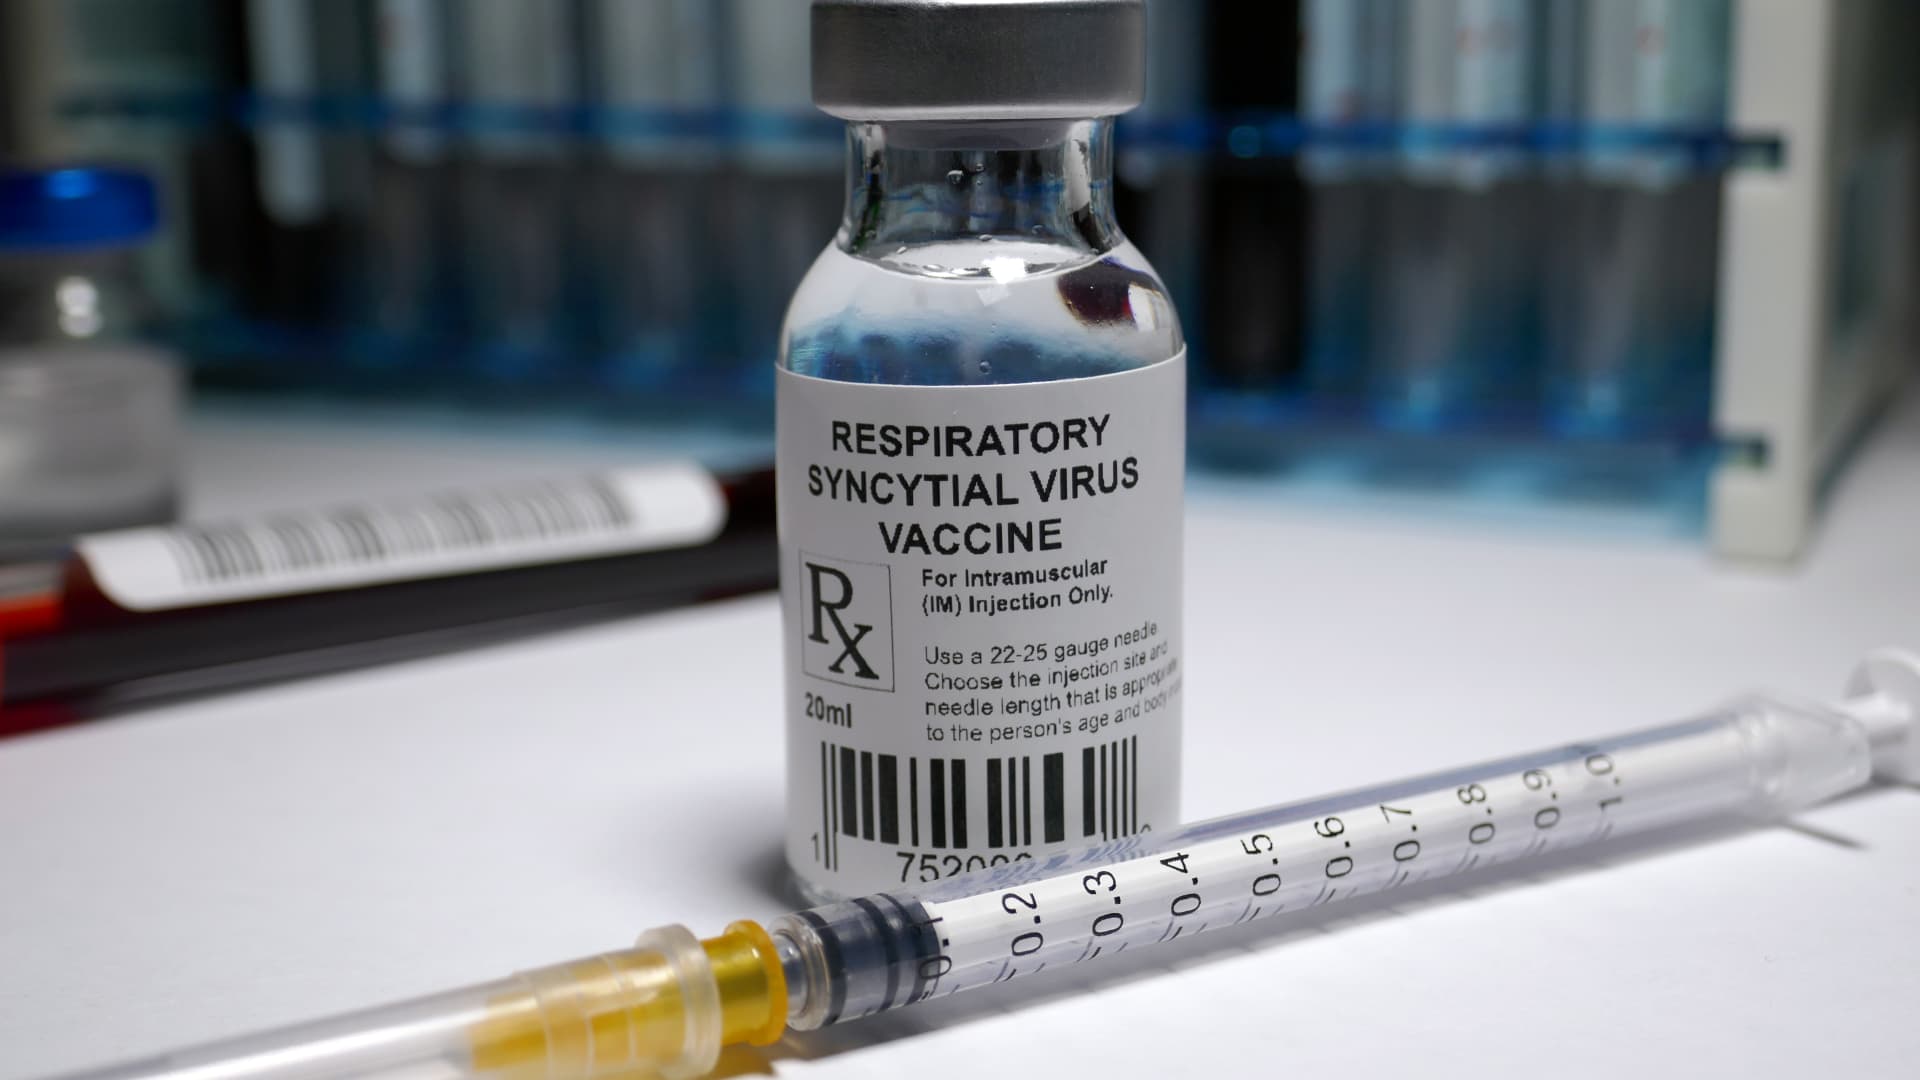 Pfizer’s RSV vaccine shows potential to protect high-risk adults ages 18-59, widening possible use